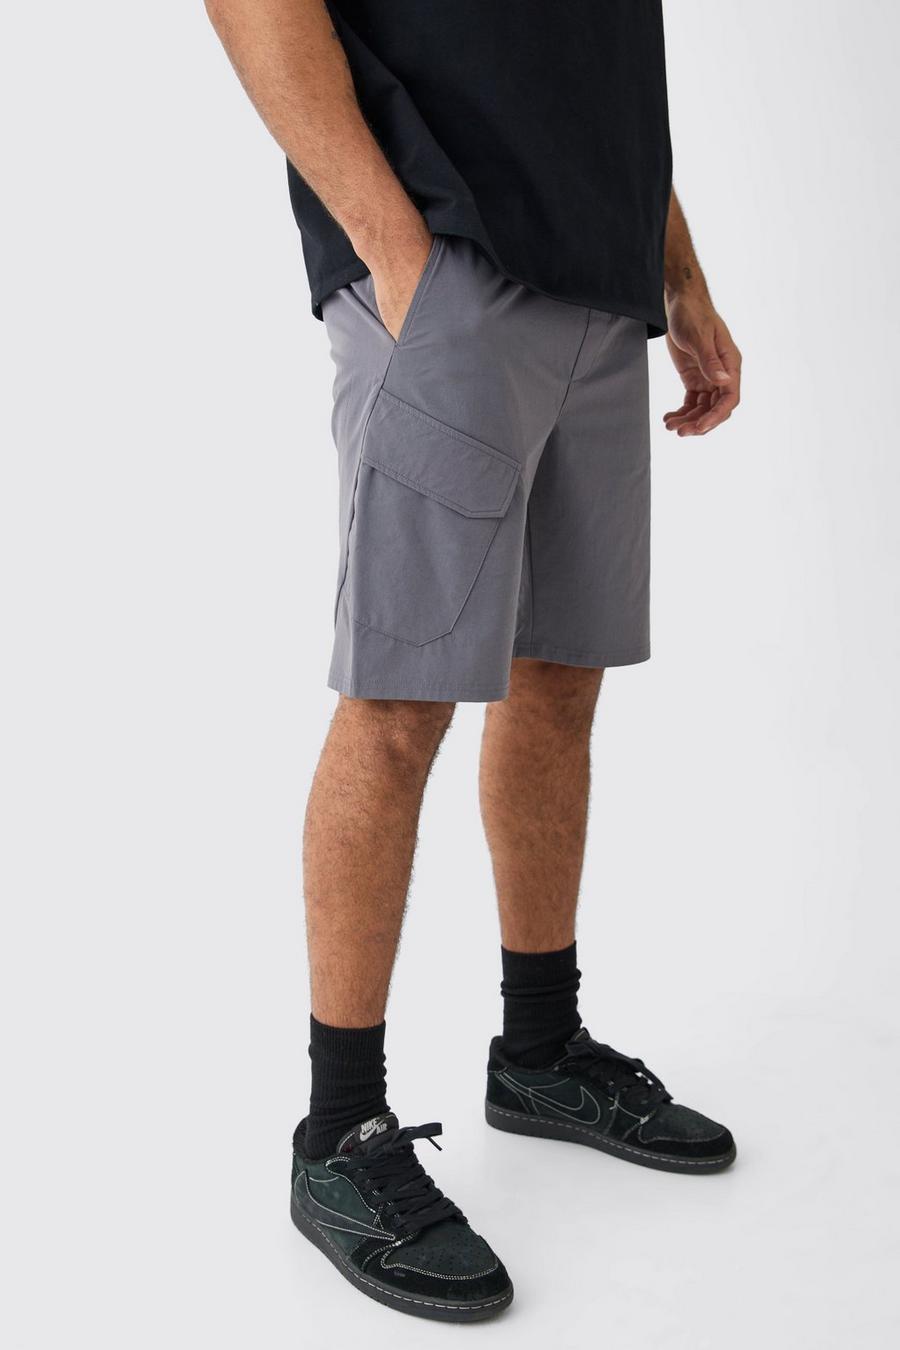 Charcoal Elastische Comfortabele Dunne Stretch Shorts